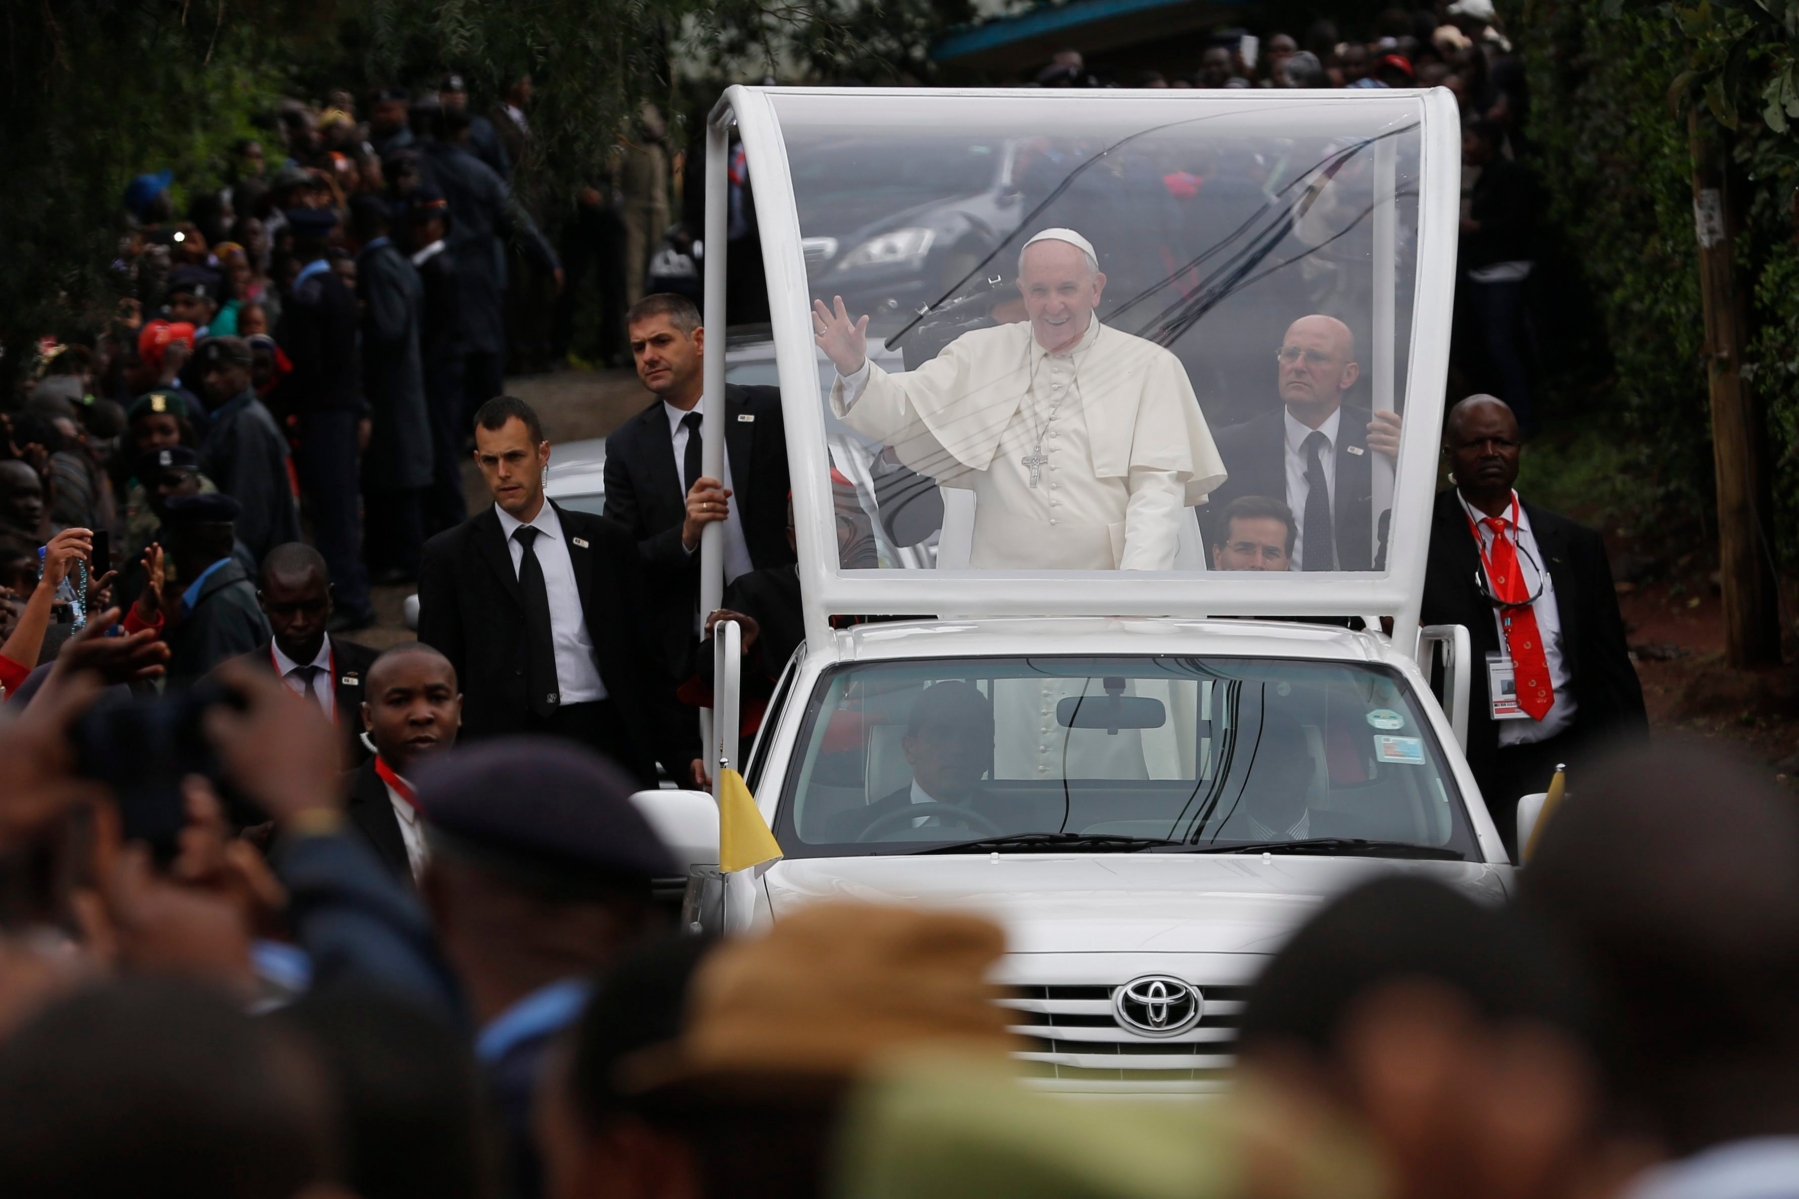 epa05043843 Pope Francis (C) waves at faithfuls as he arrives with the Popemobile to attend a mass at St Joseph Catholic church in Kangemi slum in Nairobi, Kenya, 27 November 2015. Hundreds of worshippers attended a mass. Pope Francis is on his three-nation African tour.  EPA/DAI KUROKAWA KENYA POPE FRANCIS VISIT